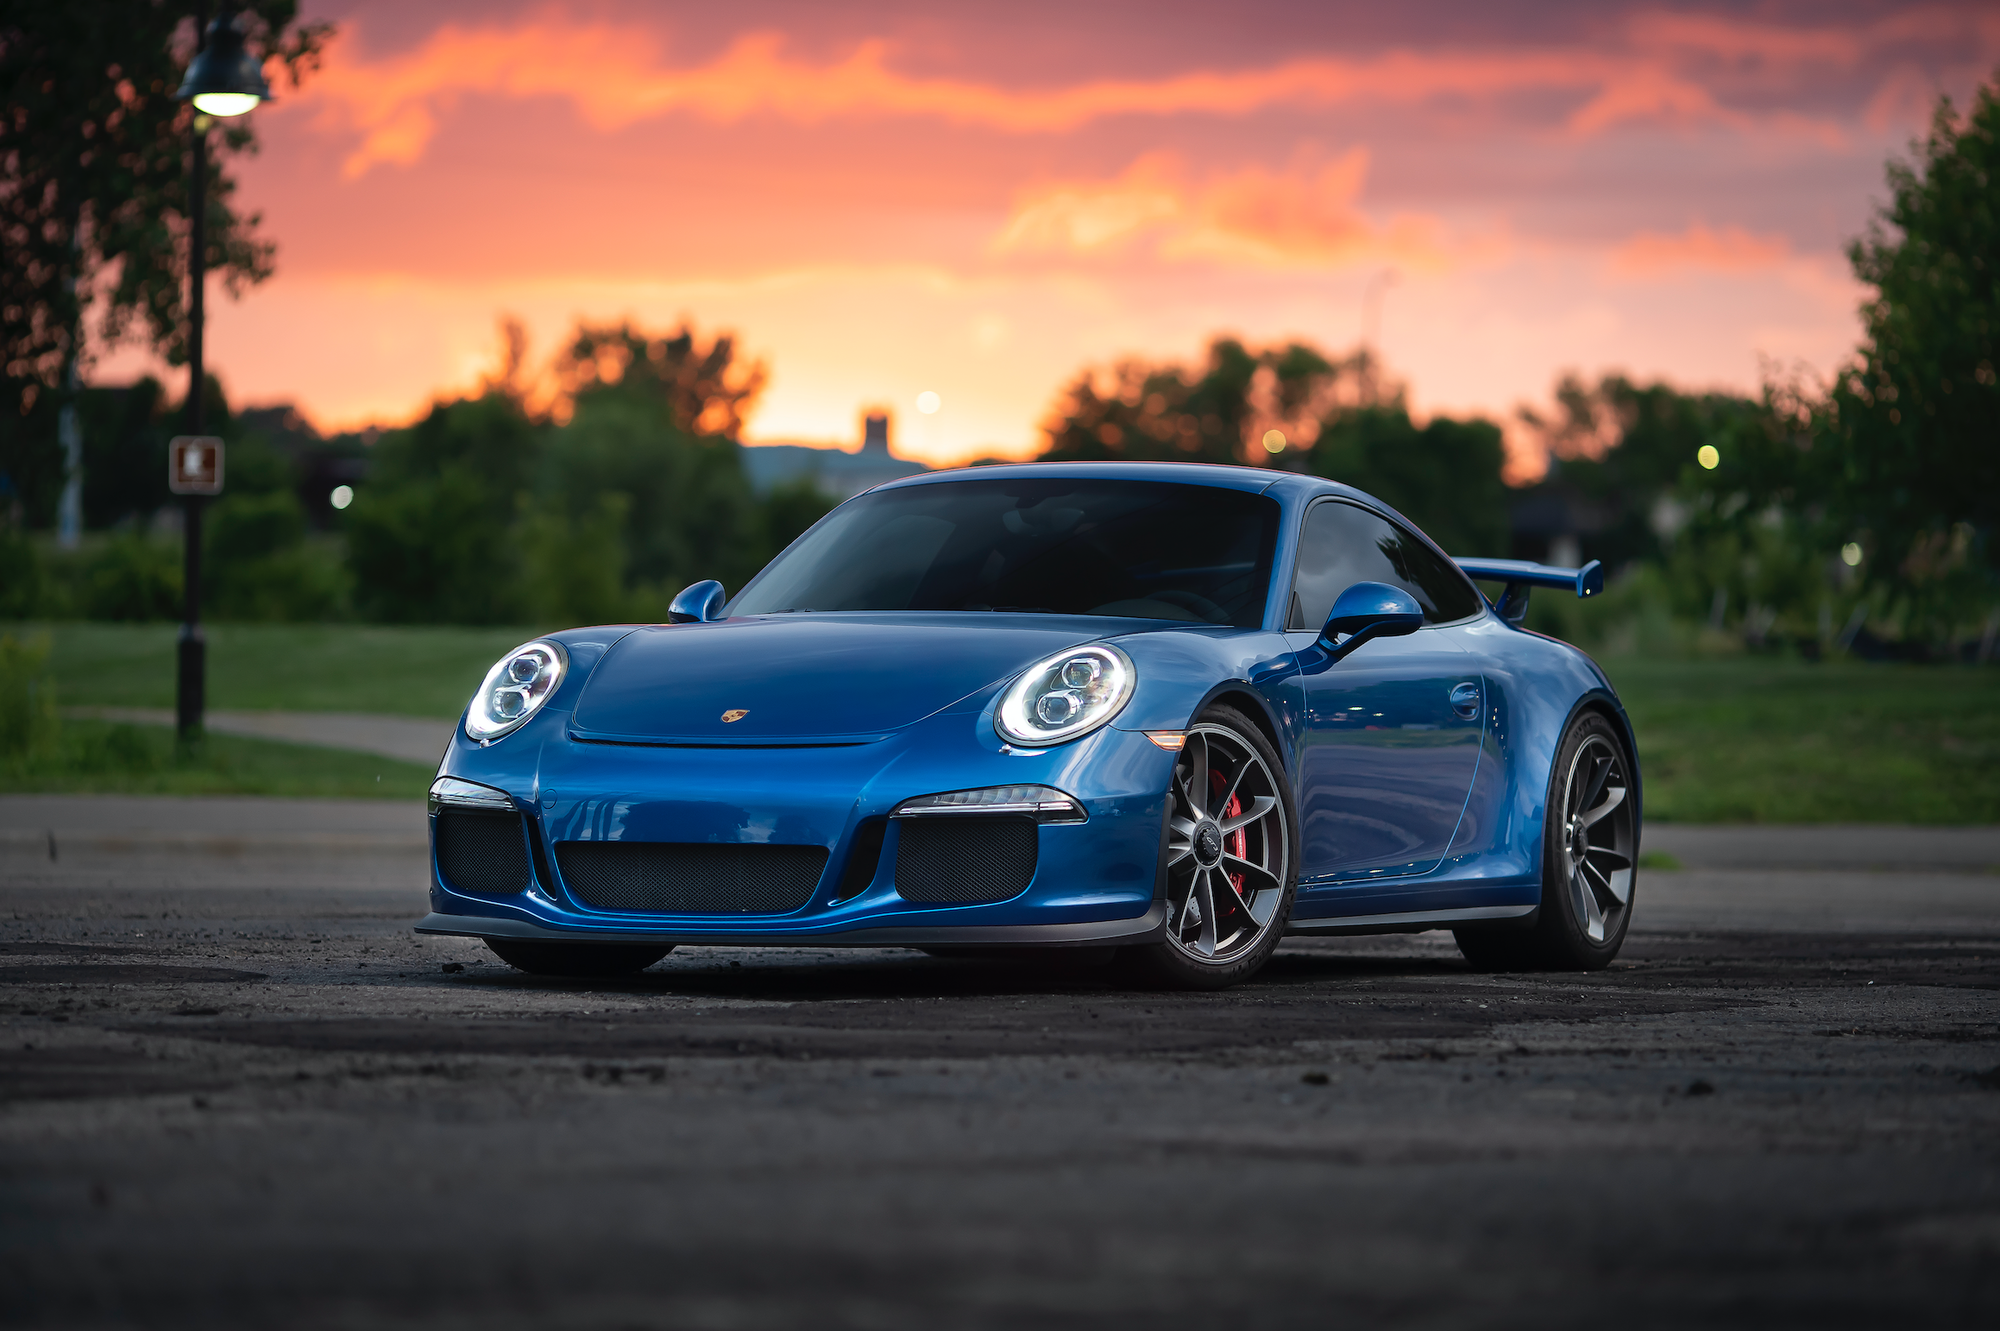 2015 Porsche GT3 - 2015 GT3 Sapphire Blue Metallic - Used - VIN WP0AC2A94FS183937 - 16,175 Miles - Automatic - Coupe - Blue - Minneapolis, MN 55401, United States